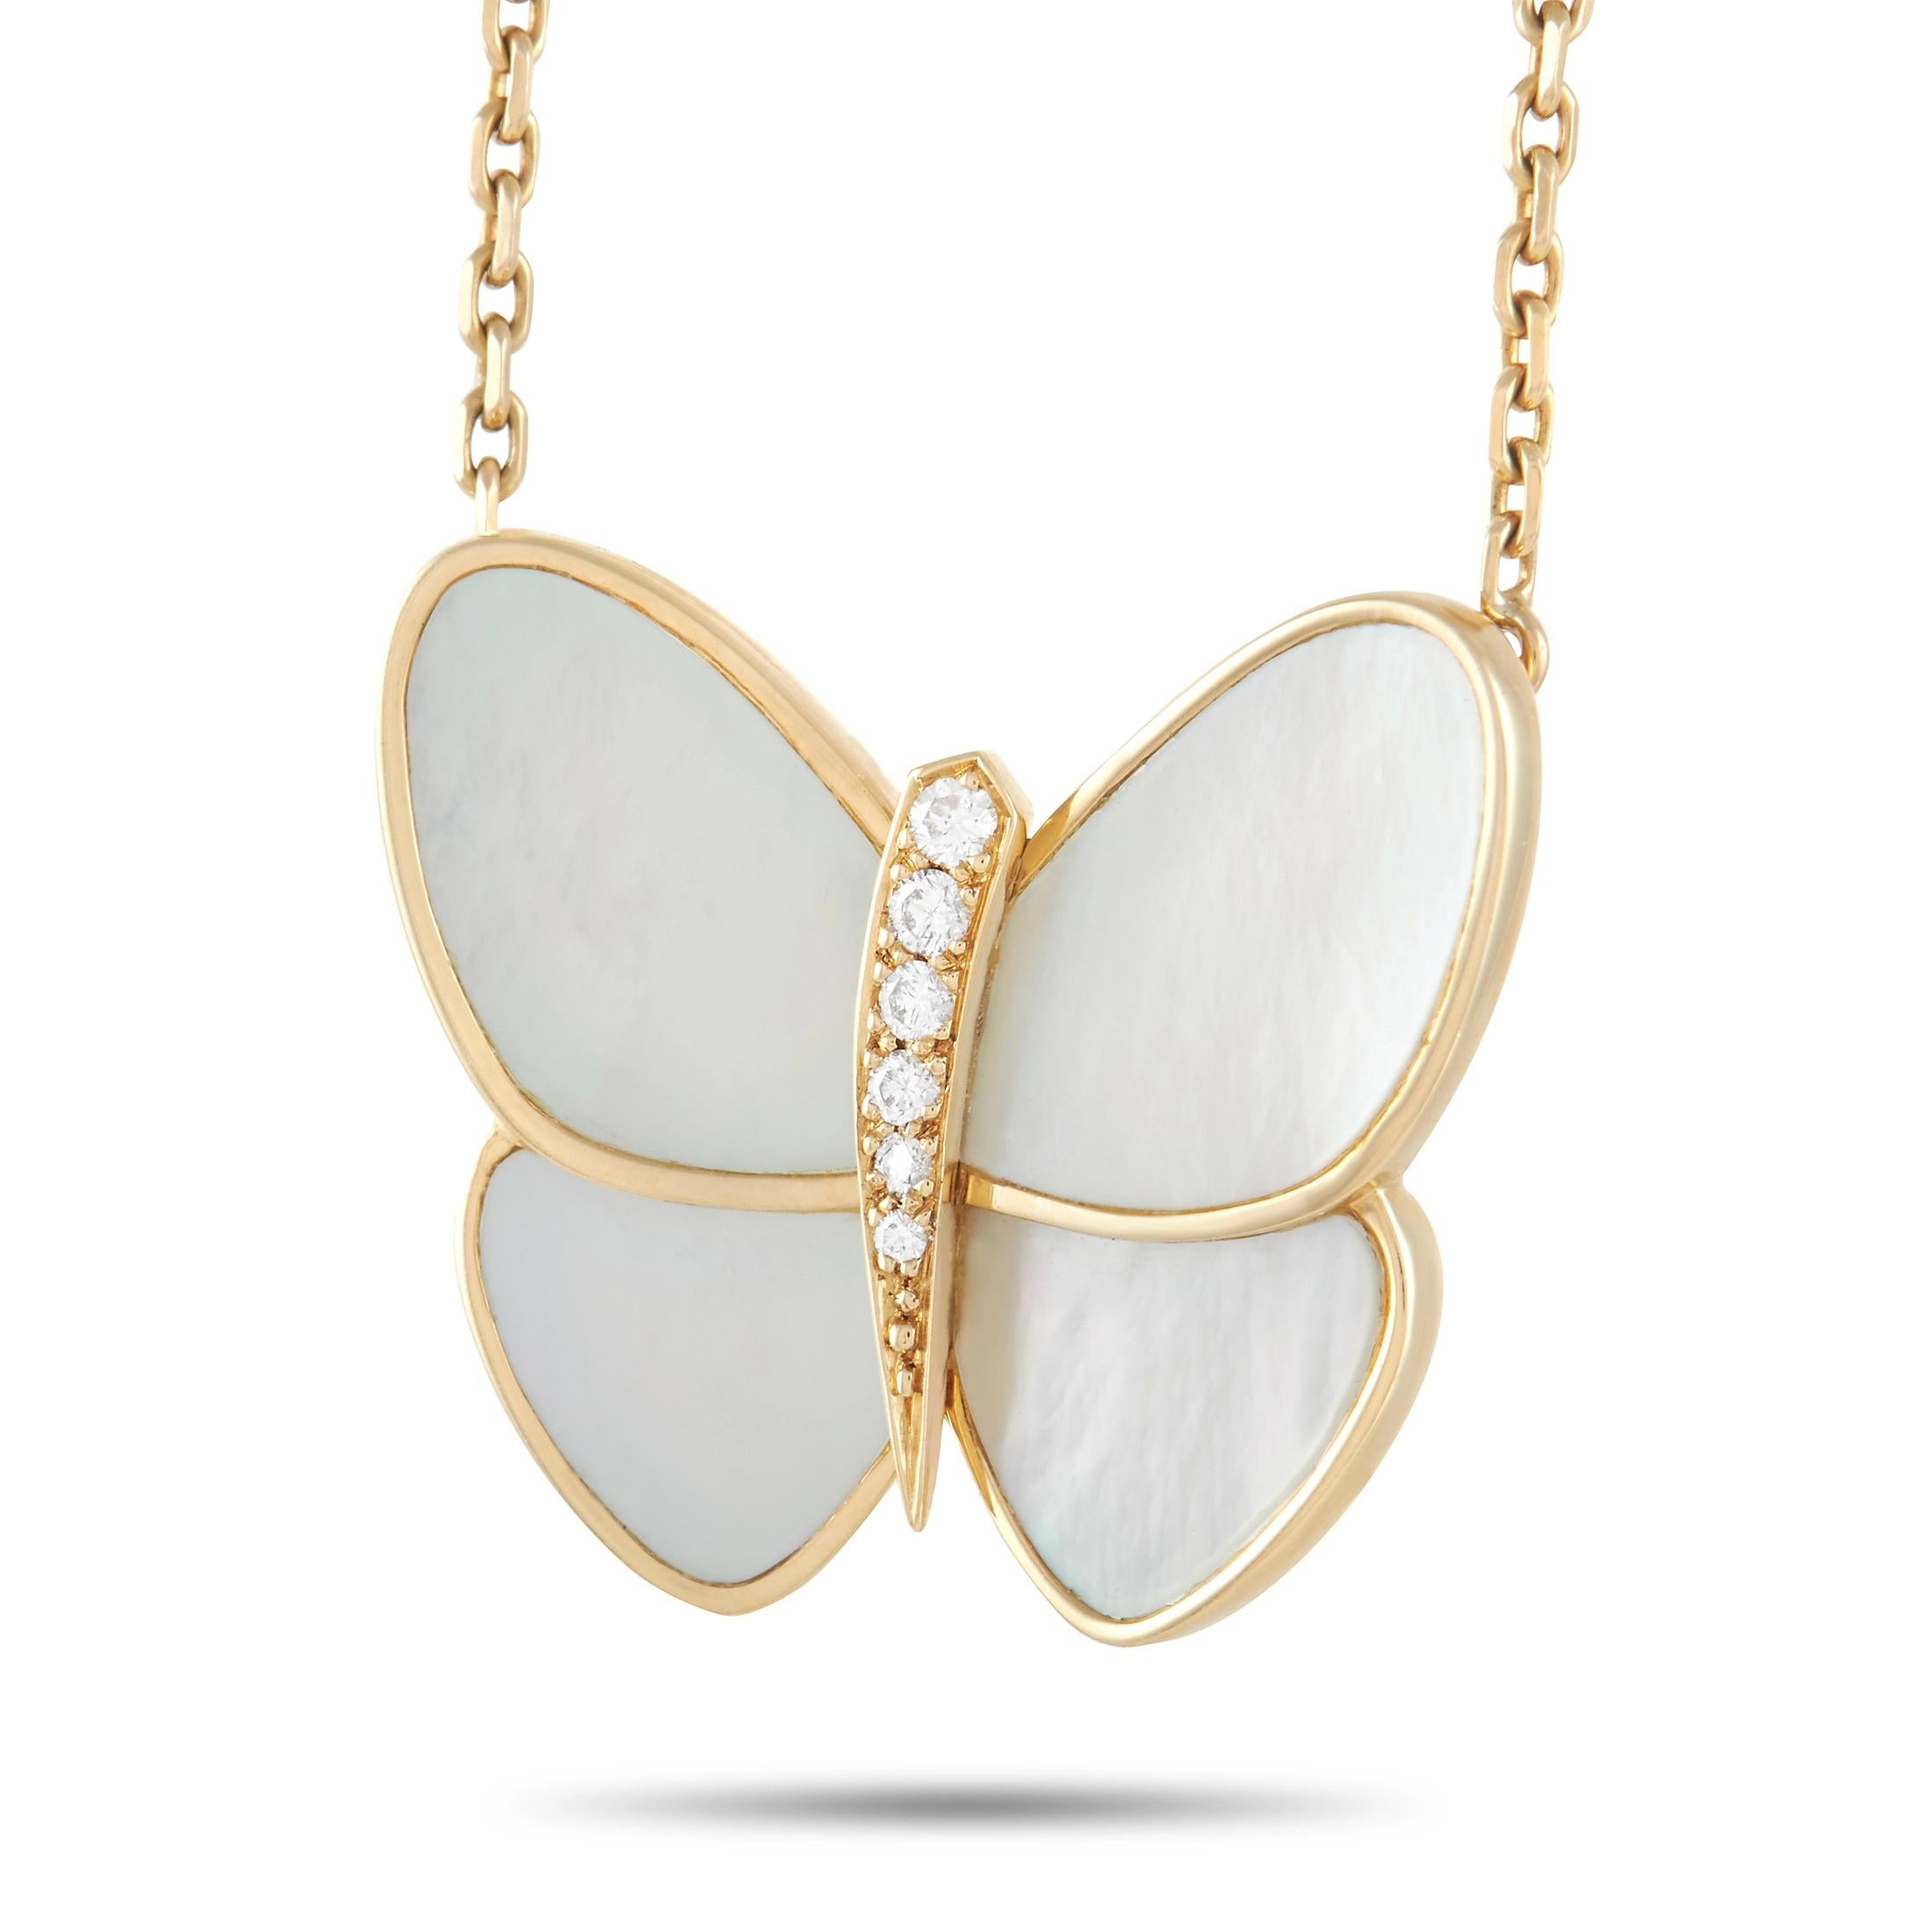 Butterflies have long been a symbol of hope and prosperity. On this elegant pendant necklace from luxury brand Van Cleef & Arpels, this striking symbol gets reinvented using a host of precious materials. Suspended between a 15” chain with lobster